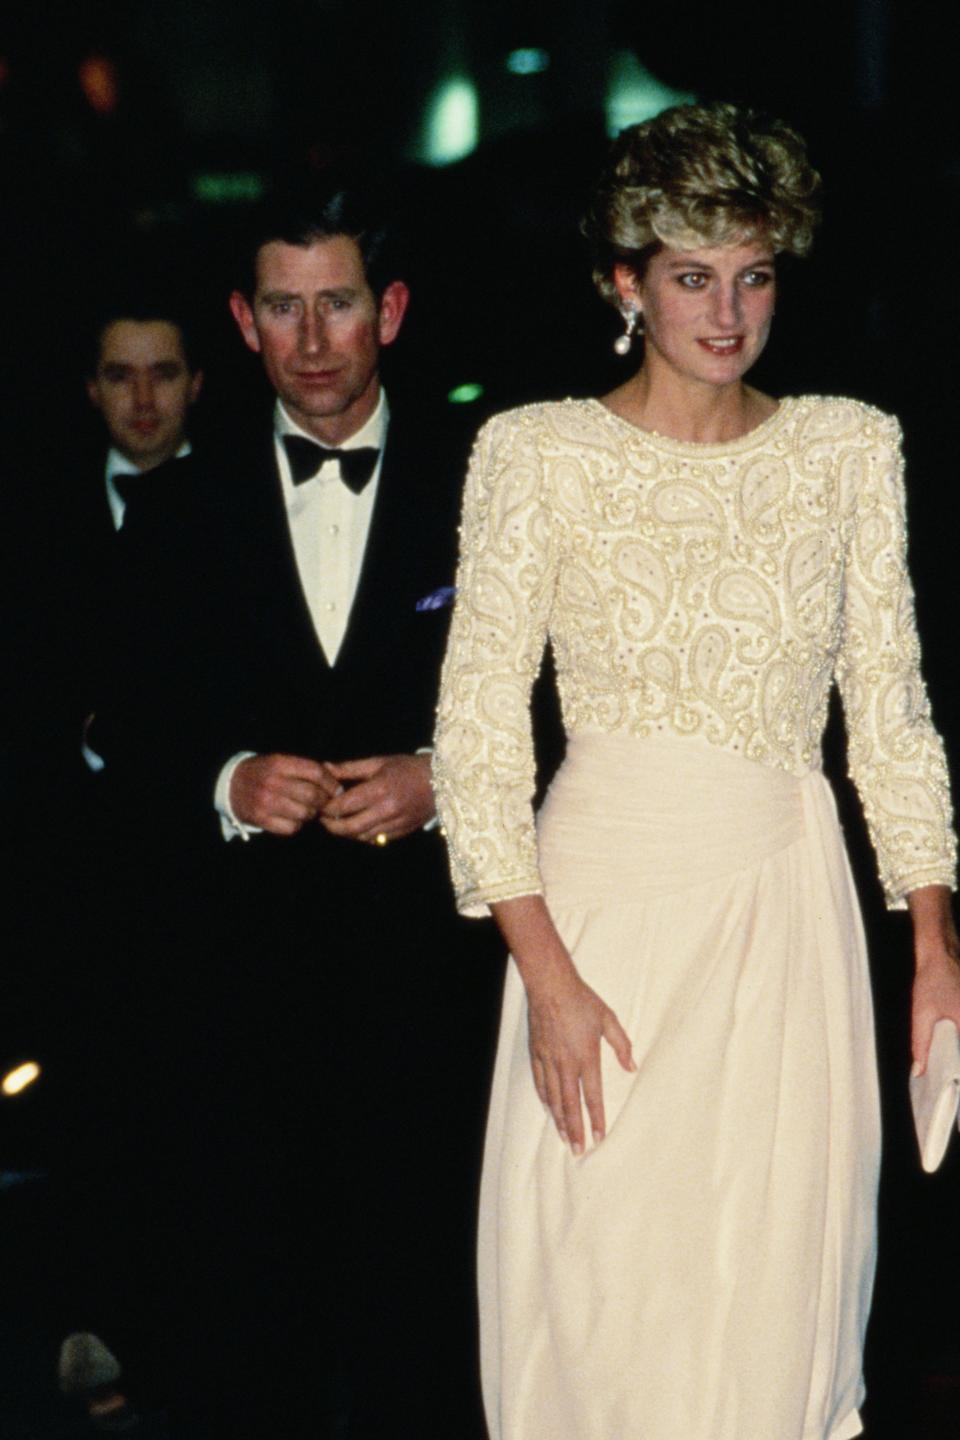 Princess Diana in elegant white gown and Prince Charles in black tuxedo at formal event